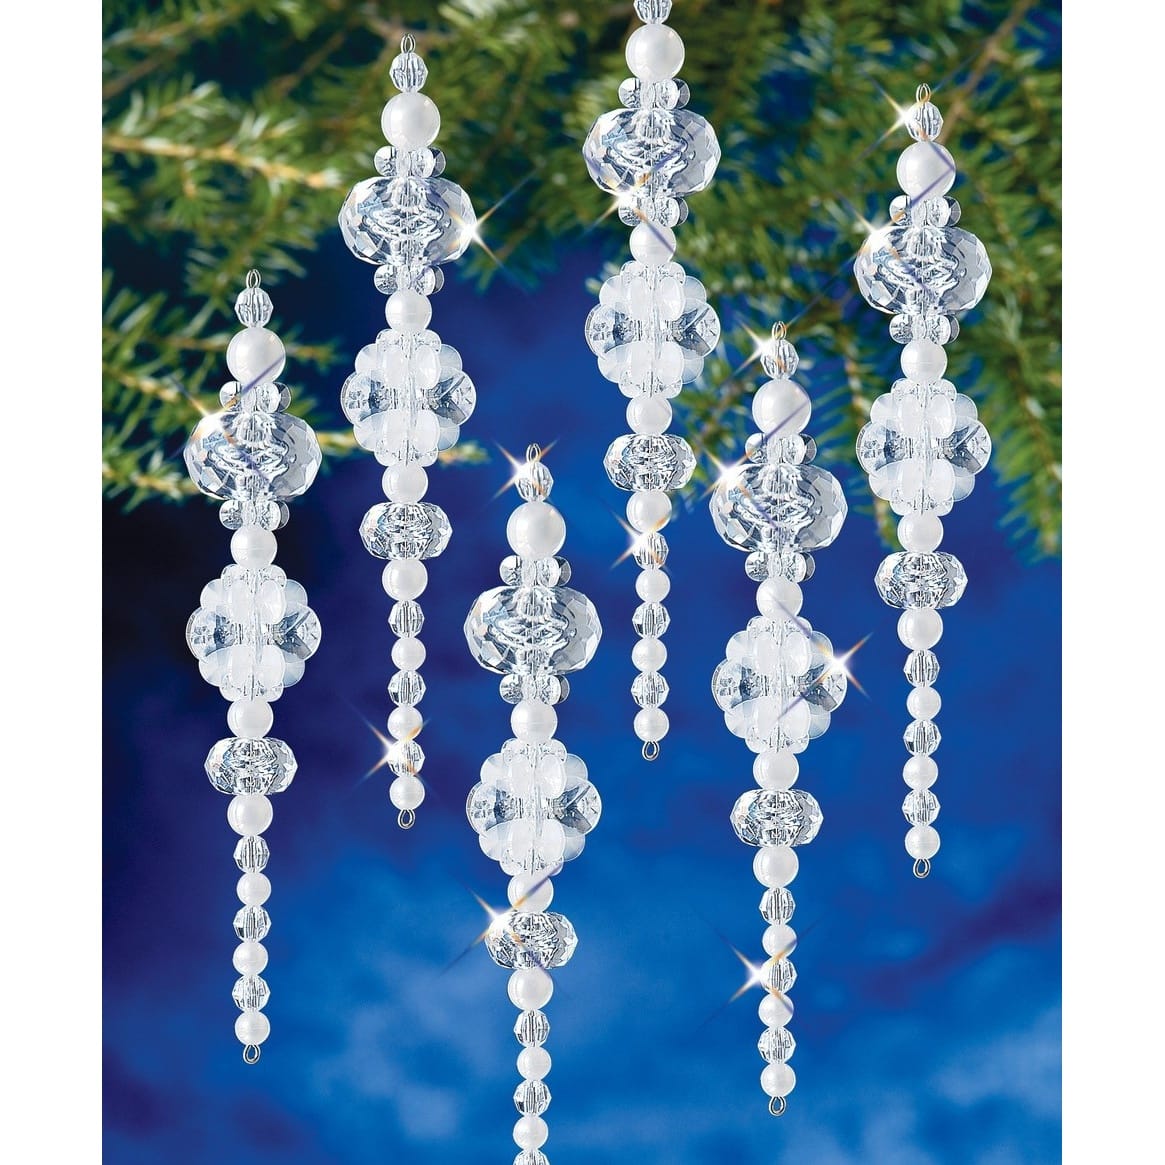 The Beadery® Ice & Pearl Icicle Holiday Beaded Ornament Kit | Michaels